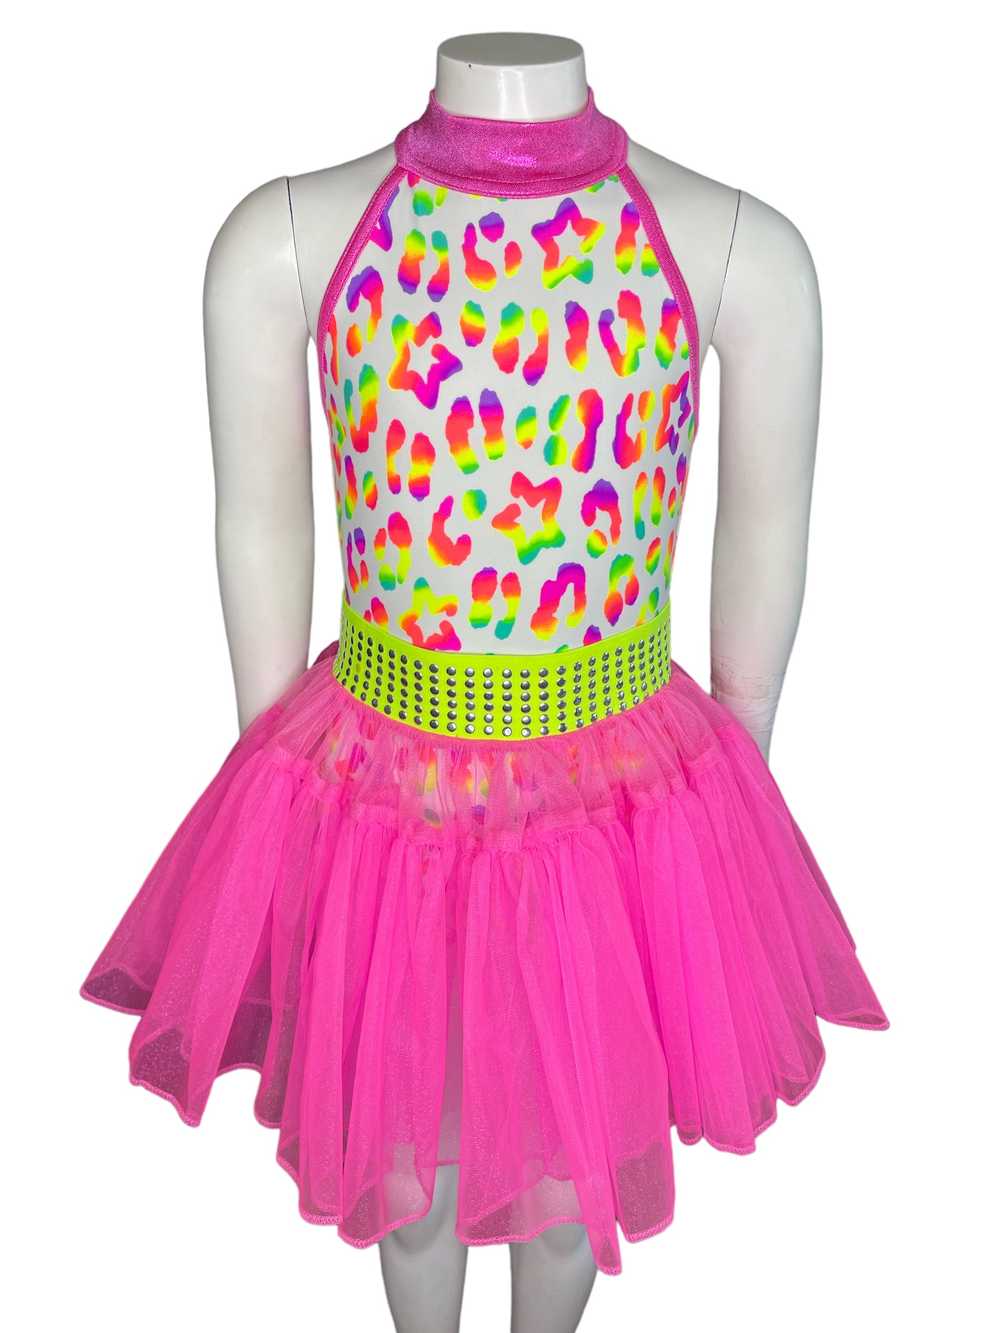 Dance costume - BRIGHT AND BEAUTIFUL - image 1